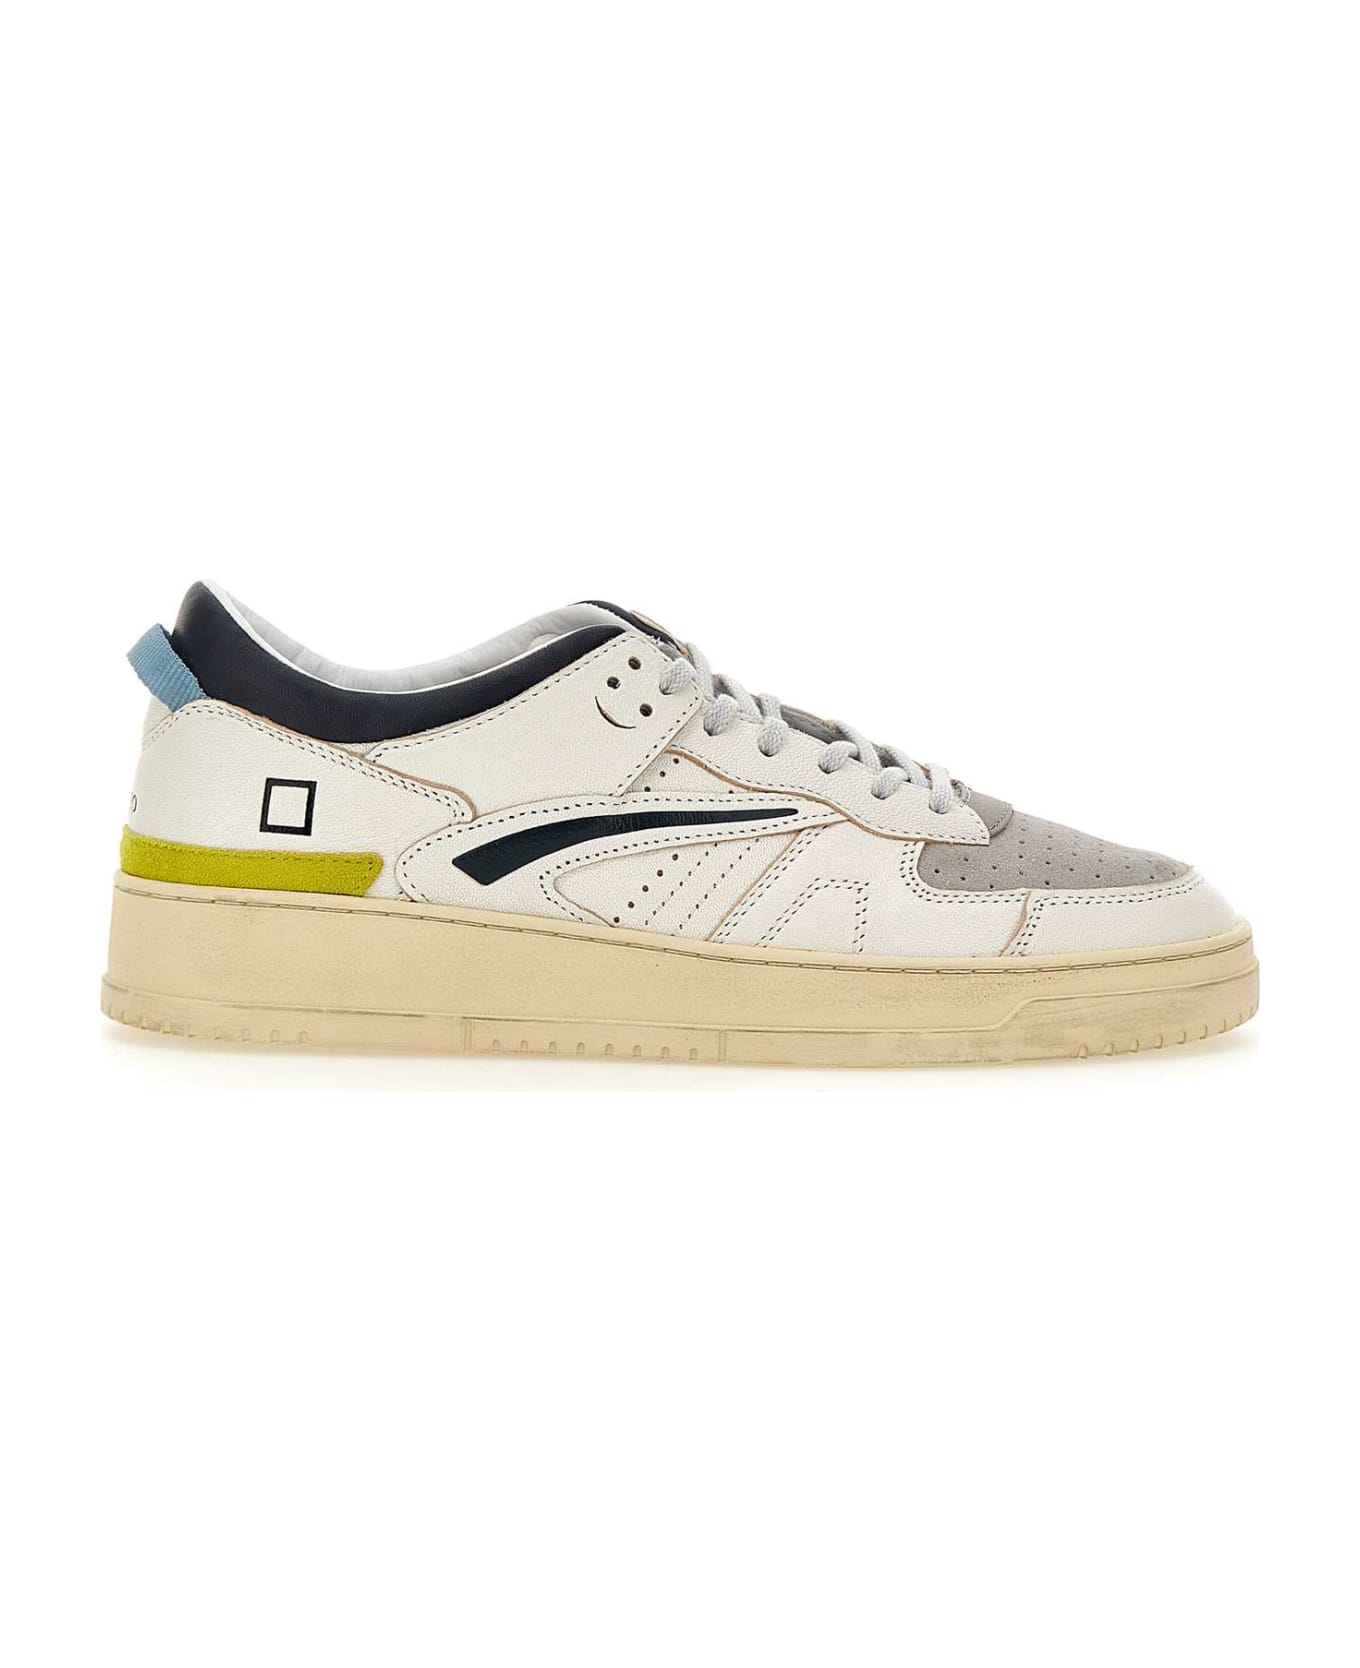 D.A.T.E. "torneo Colored" Leather Sneakers - WHITE スニーカー